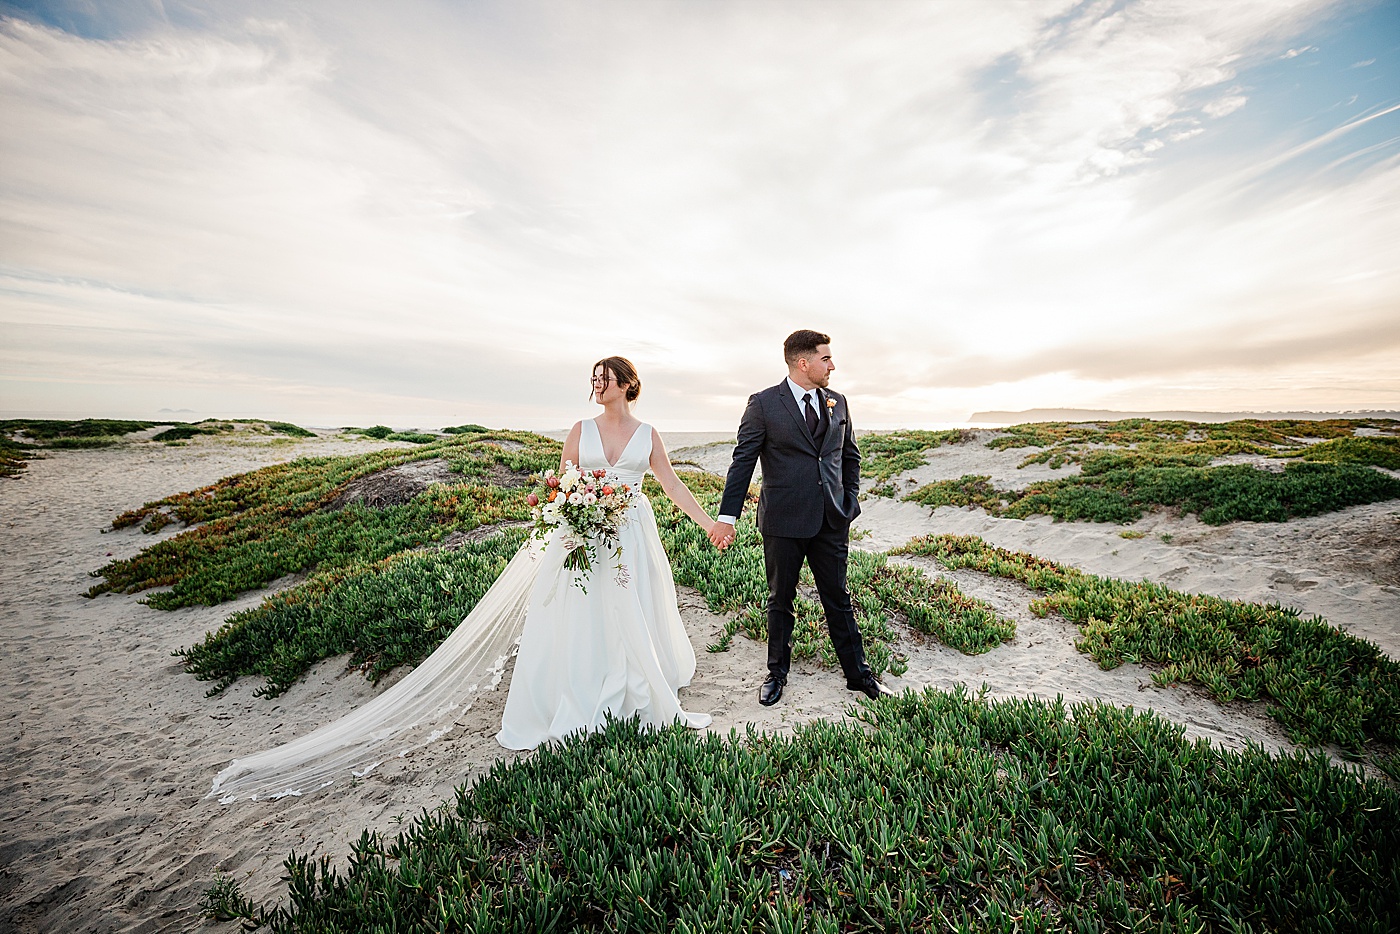 Coronado beach elopement at the sand dunes. A bride and groom holding hands and looking away from each other.